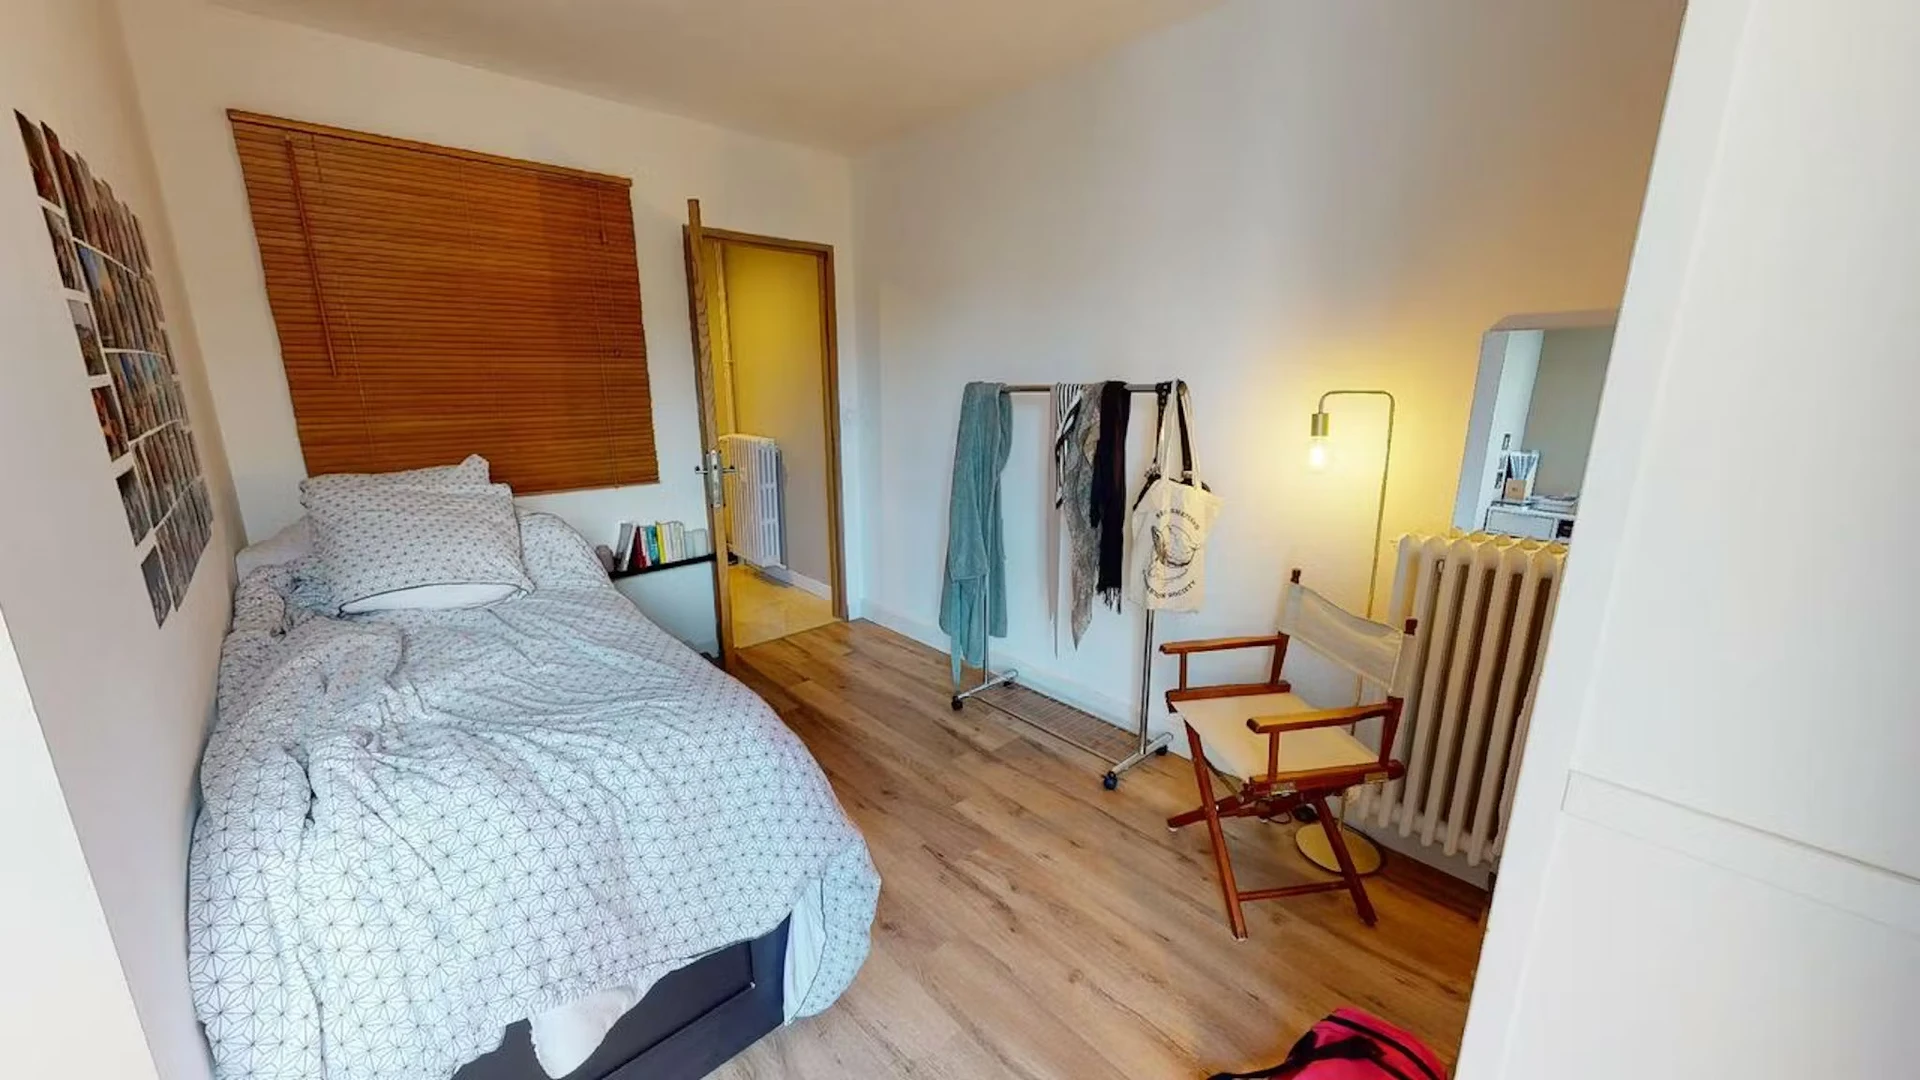 Accommodation in the centre of Poitiers